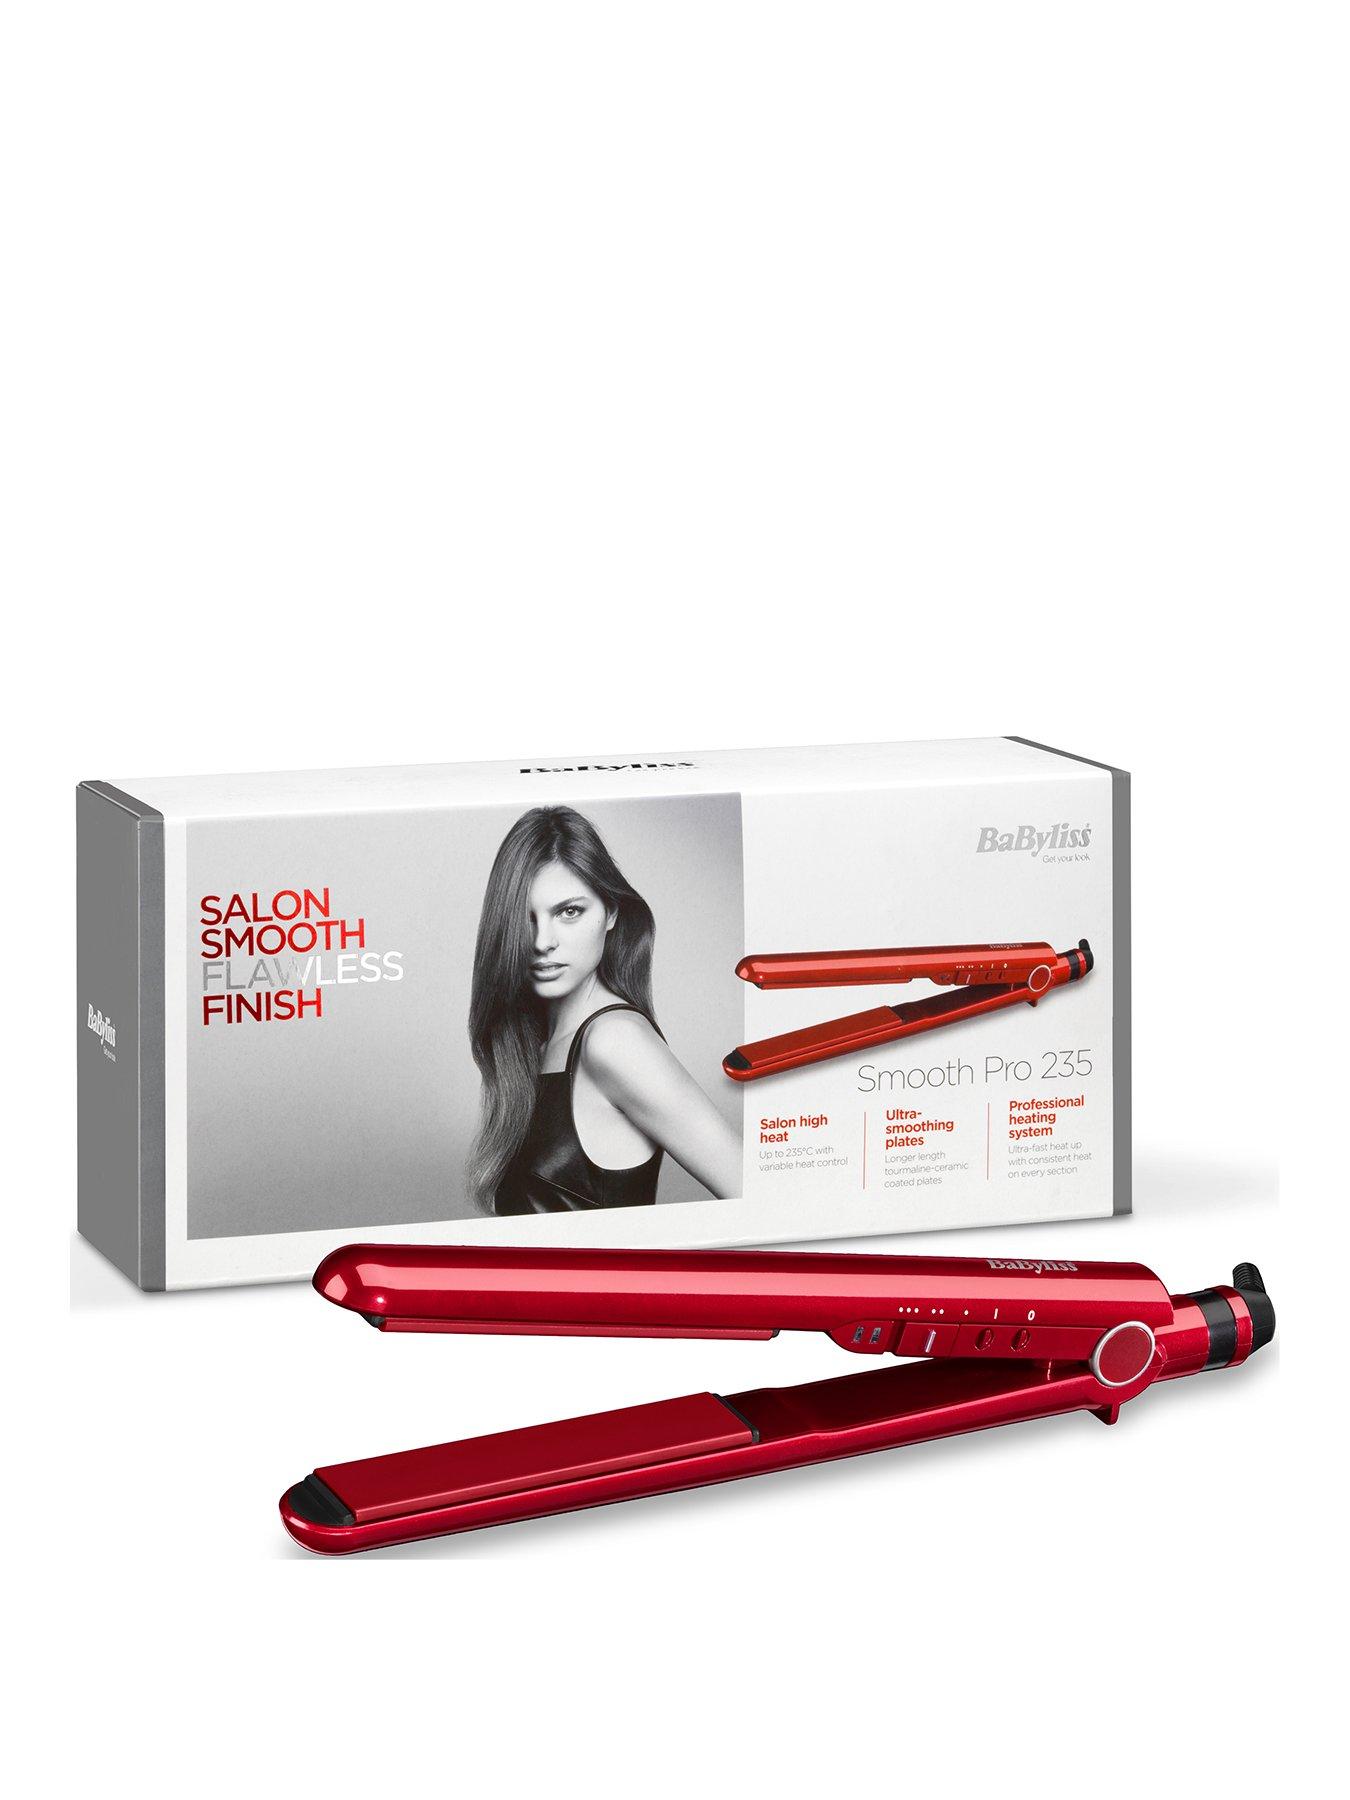 babyliss smooth 235